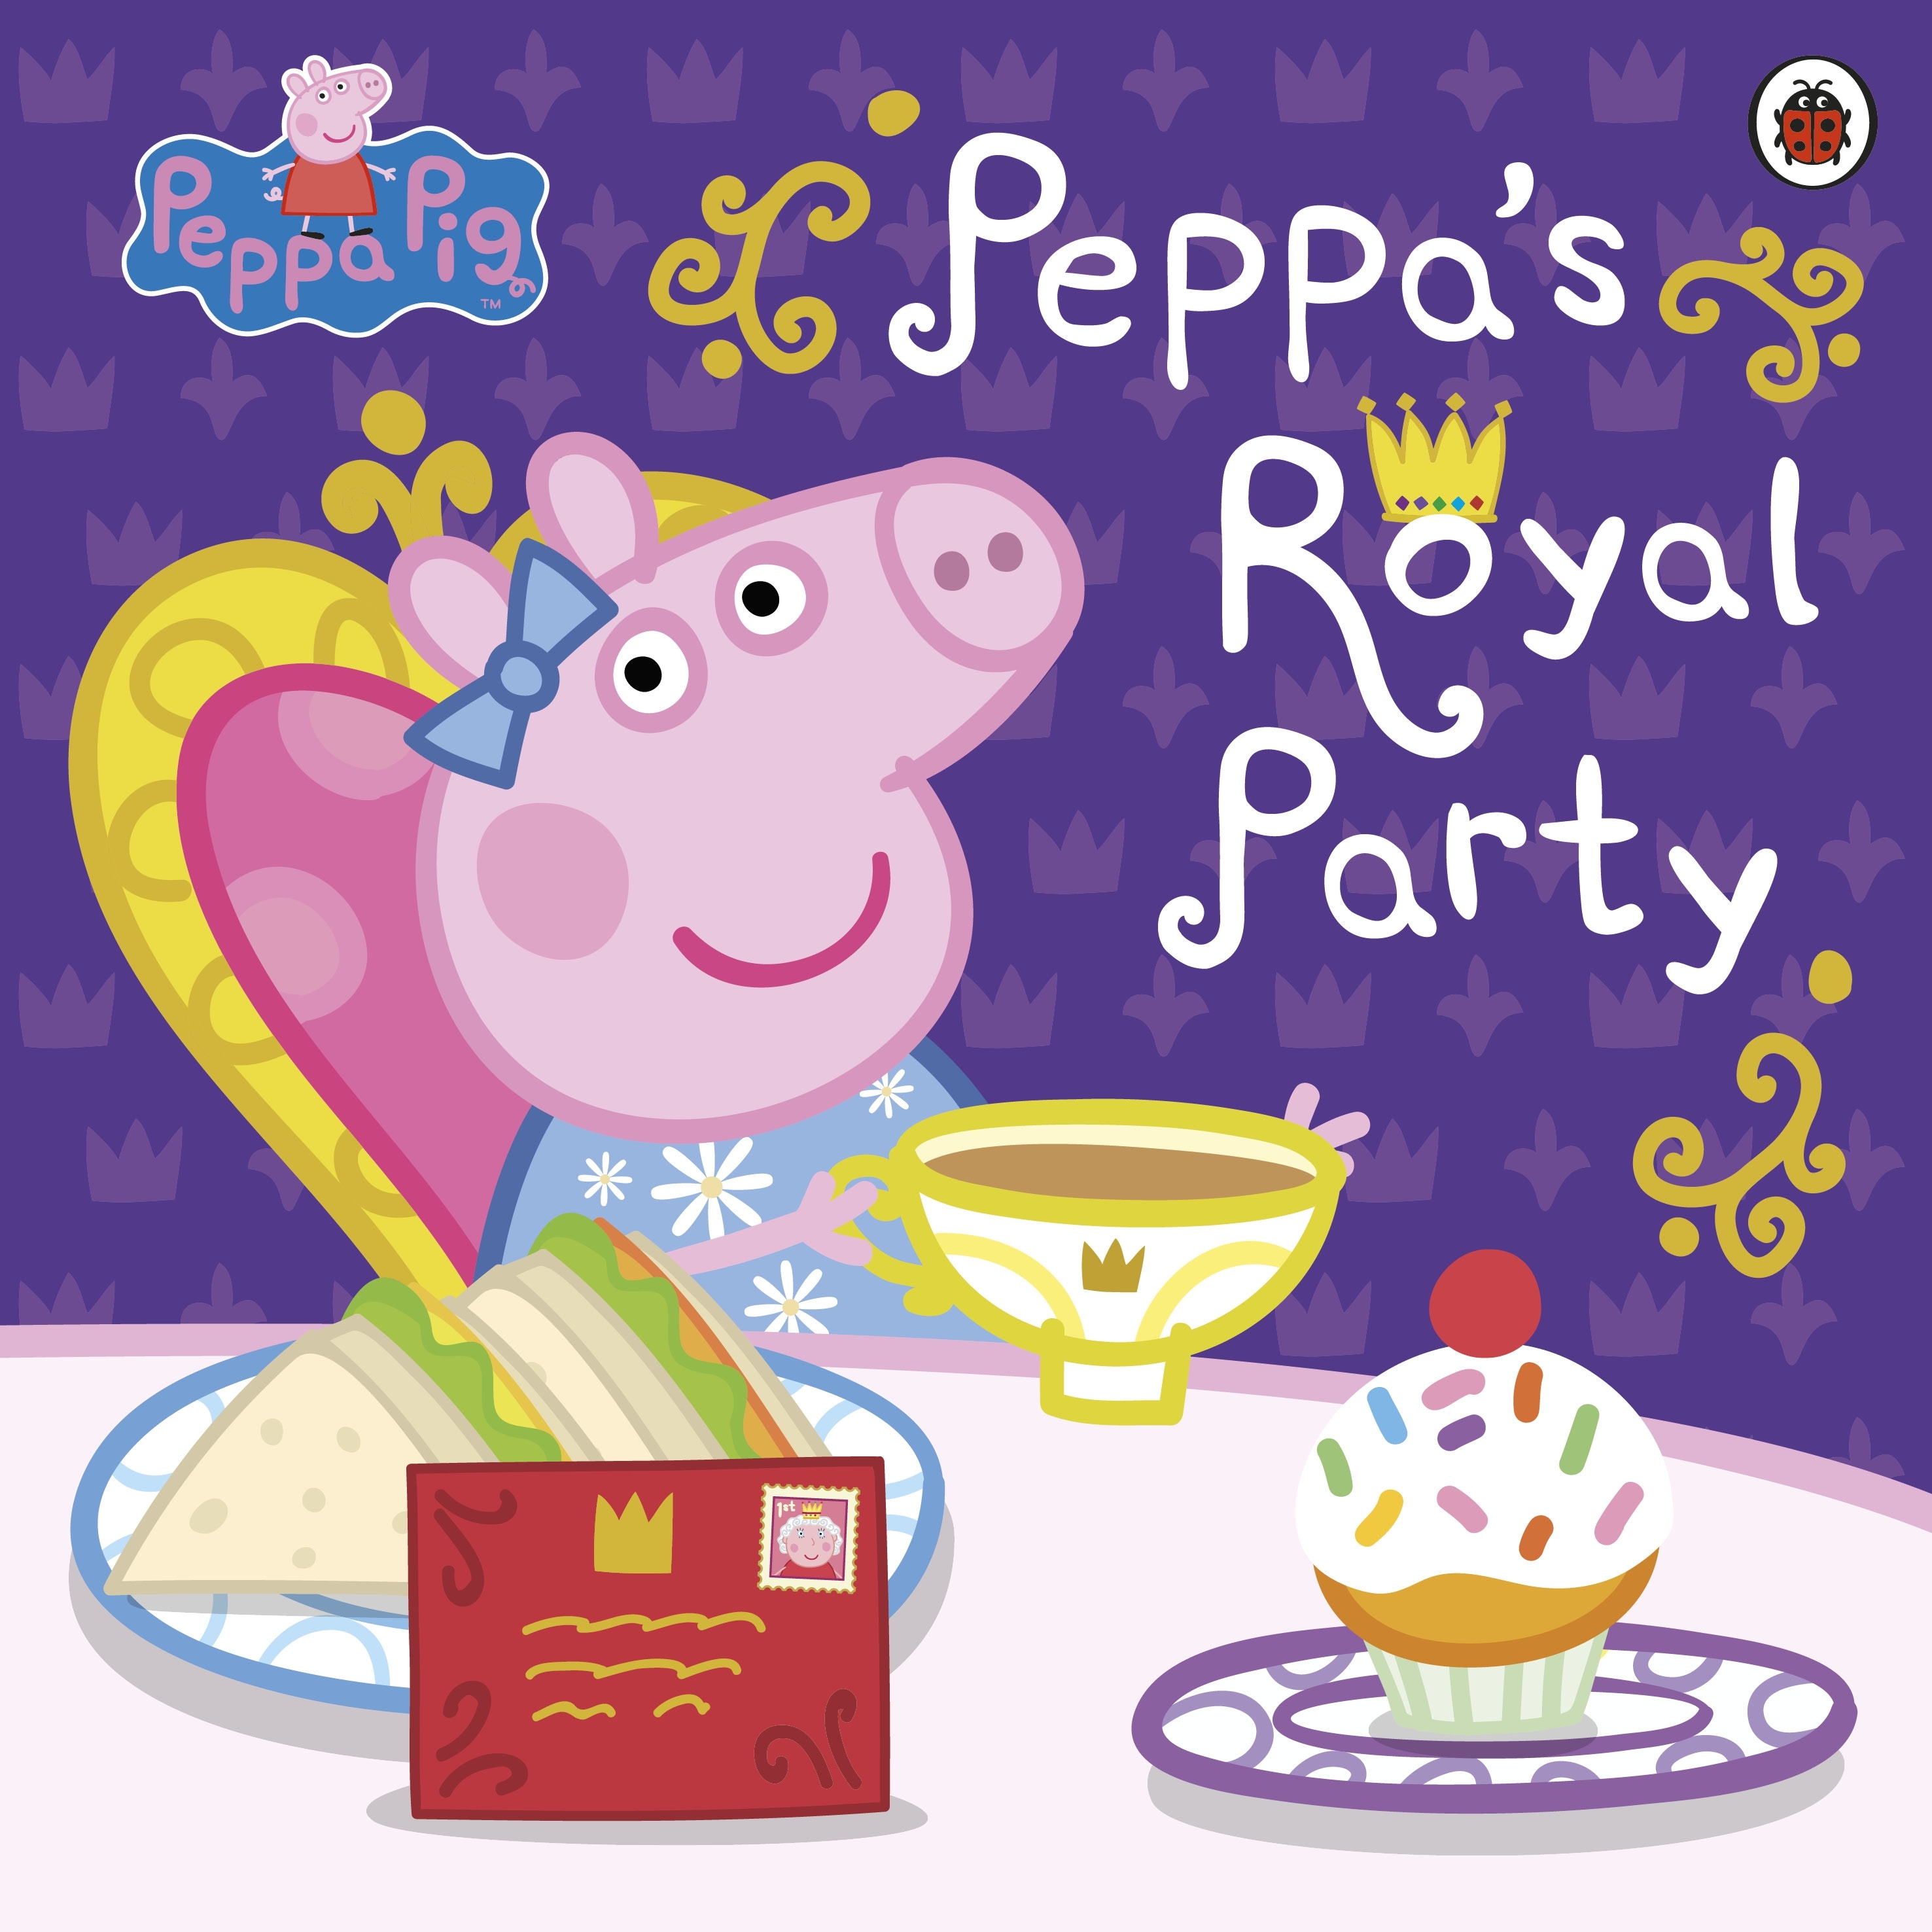 Book “Peppa Pig: Peppa's Royal Party” by Peppa Pig — January 6, 2022